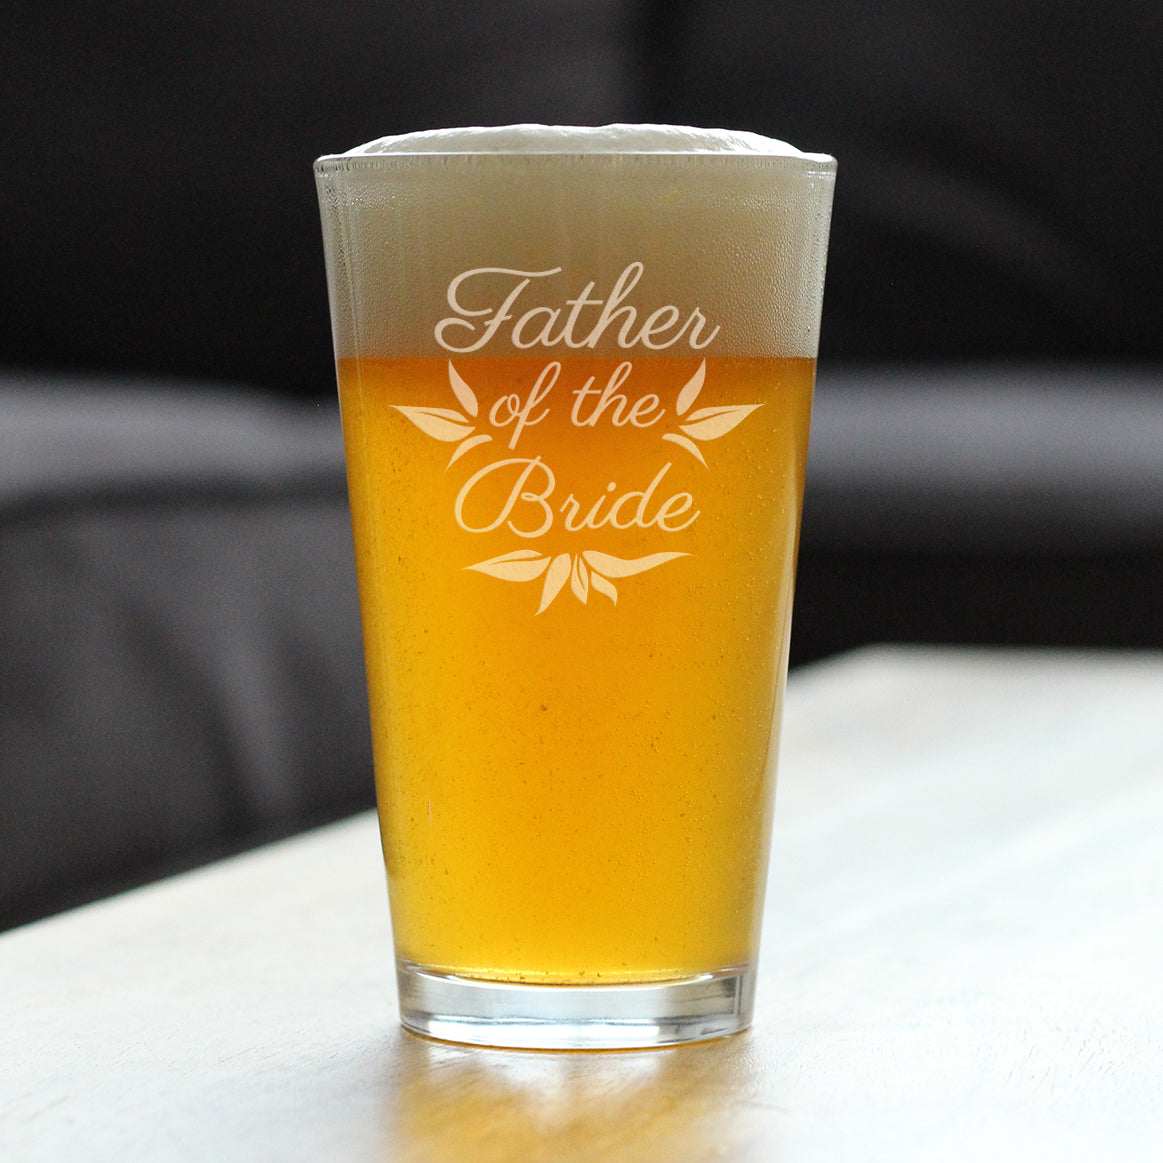 Father of the Bride Pint Glass - Unique Wedding Gift for Soon to Be Father-in-Law - Cute Engraved Wedding Cup Gift